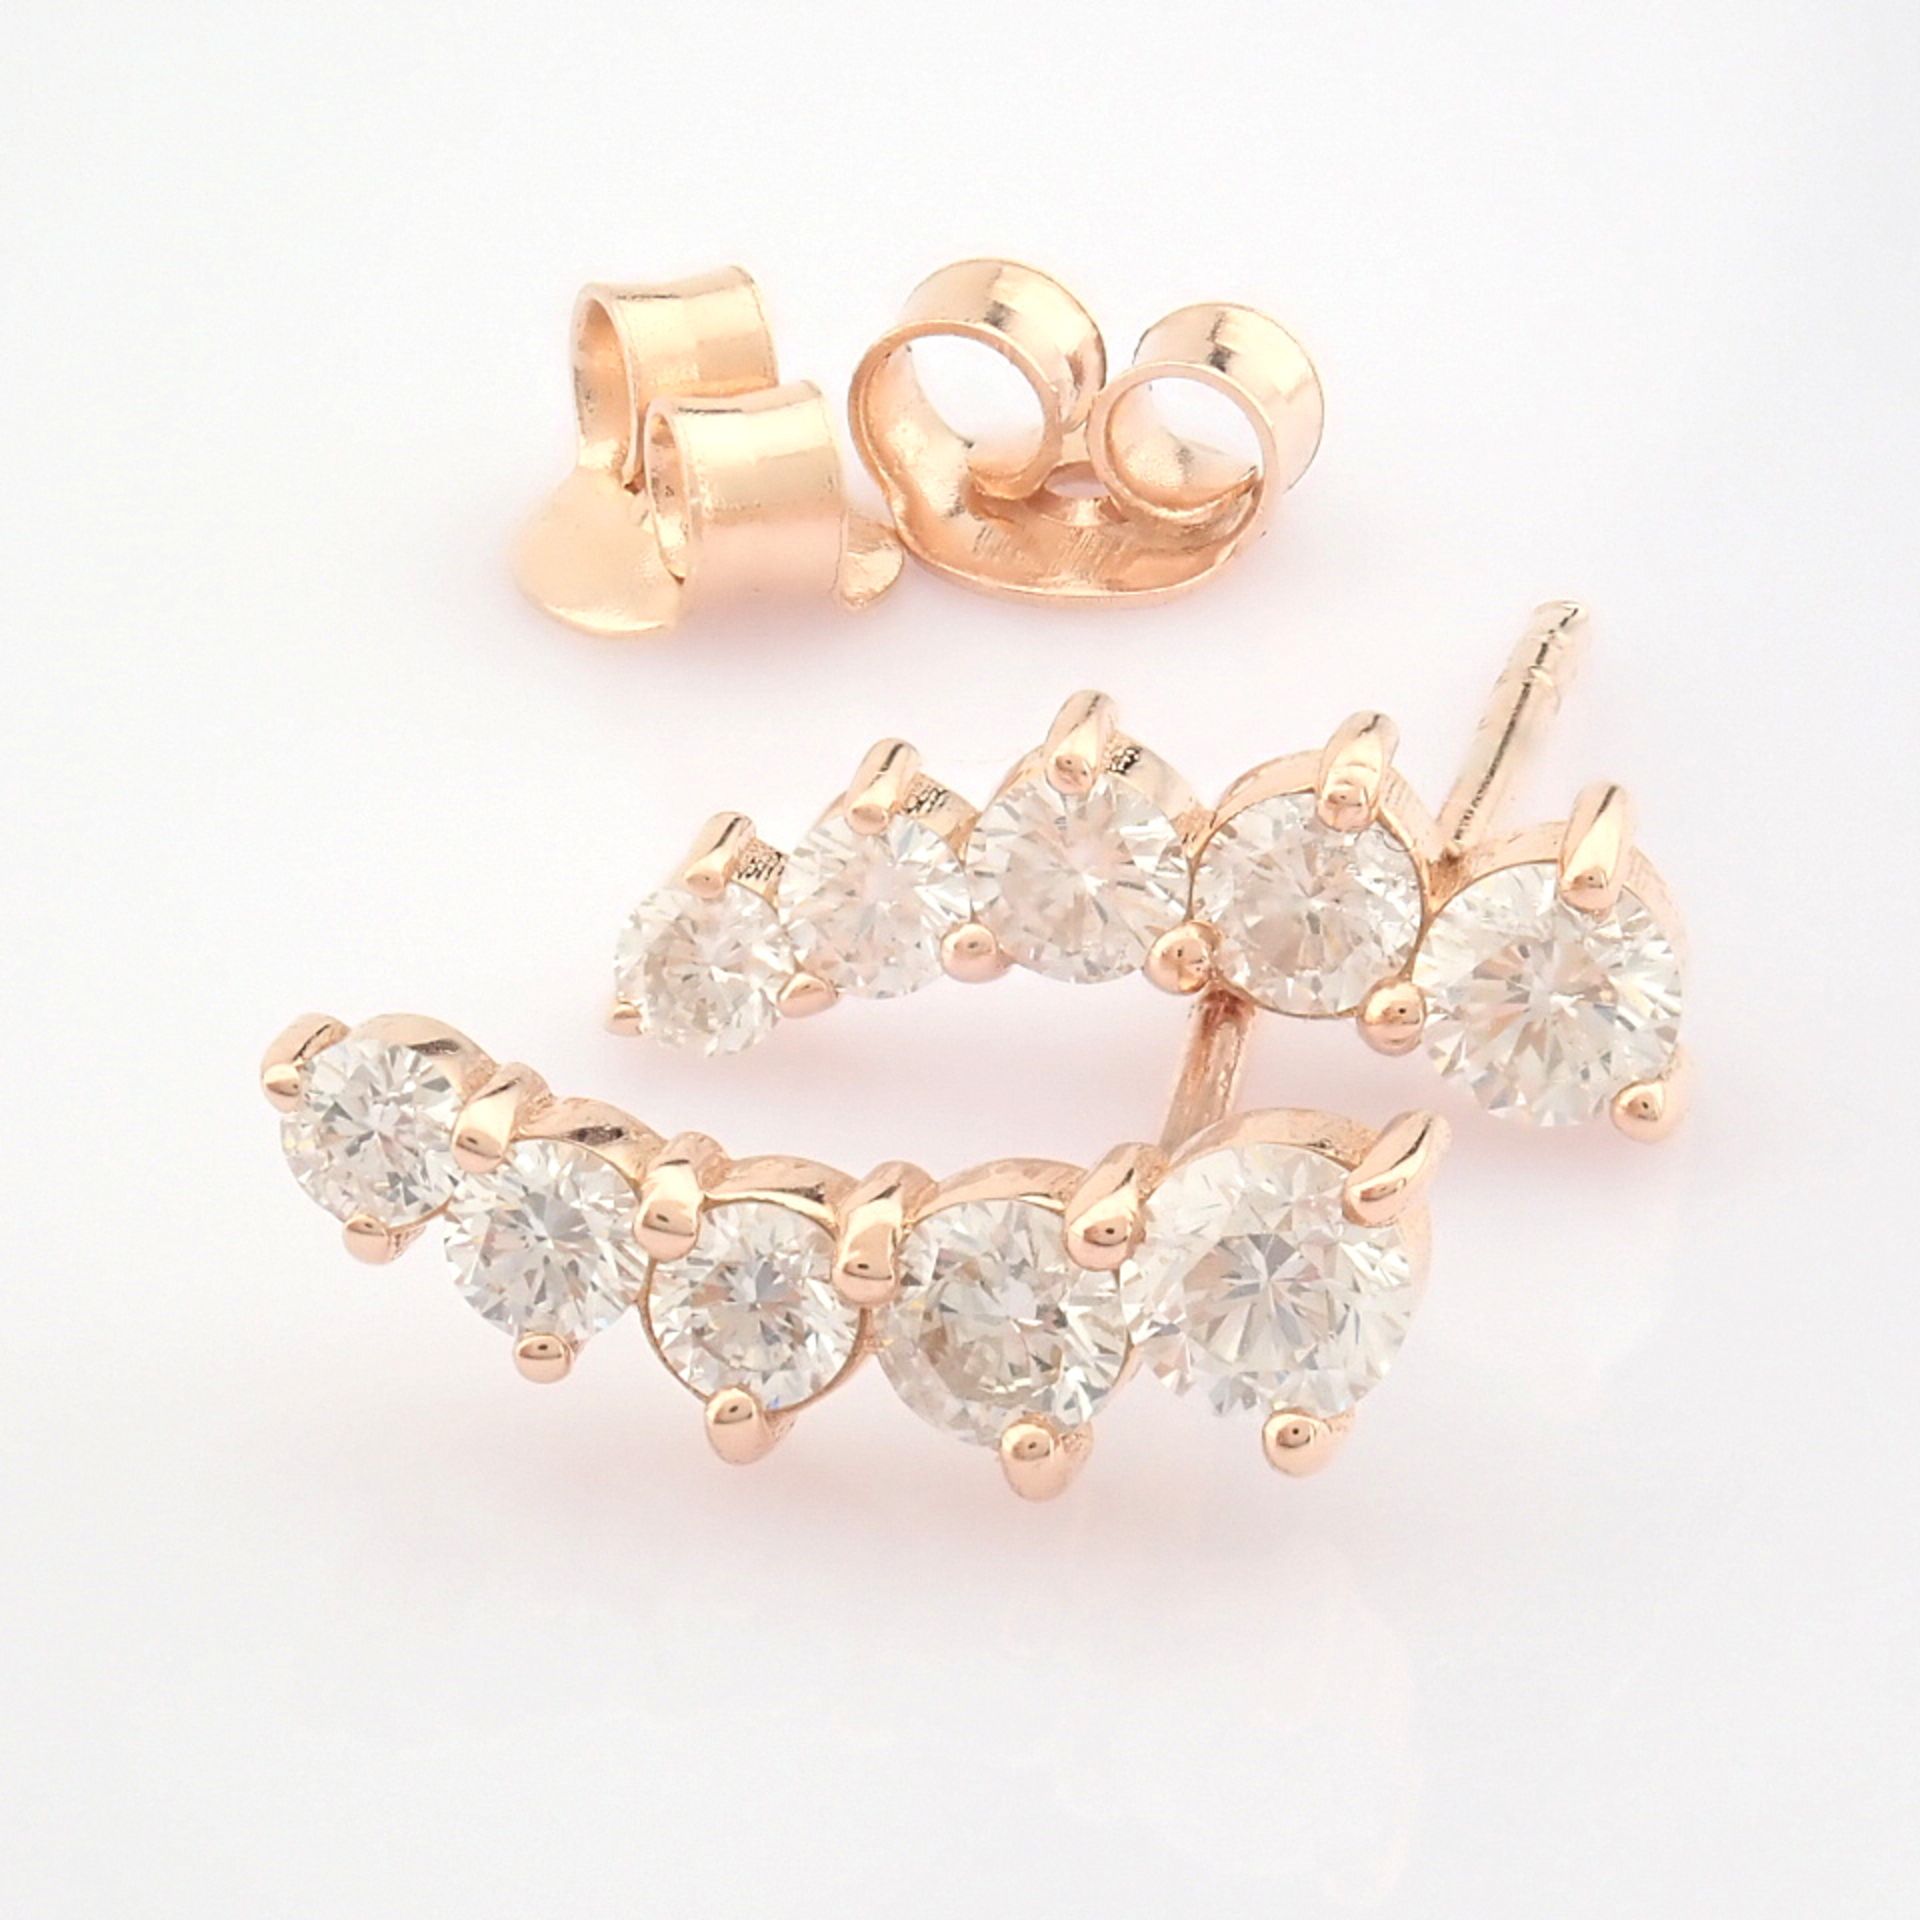 Certificated 14K Rose/Pink Gold Diamond Earring (Total 0.53 ct Stone) - Image 2 of 7